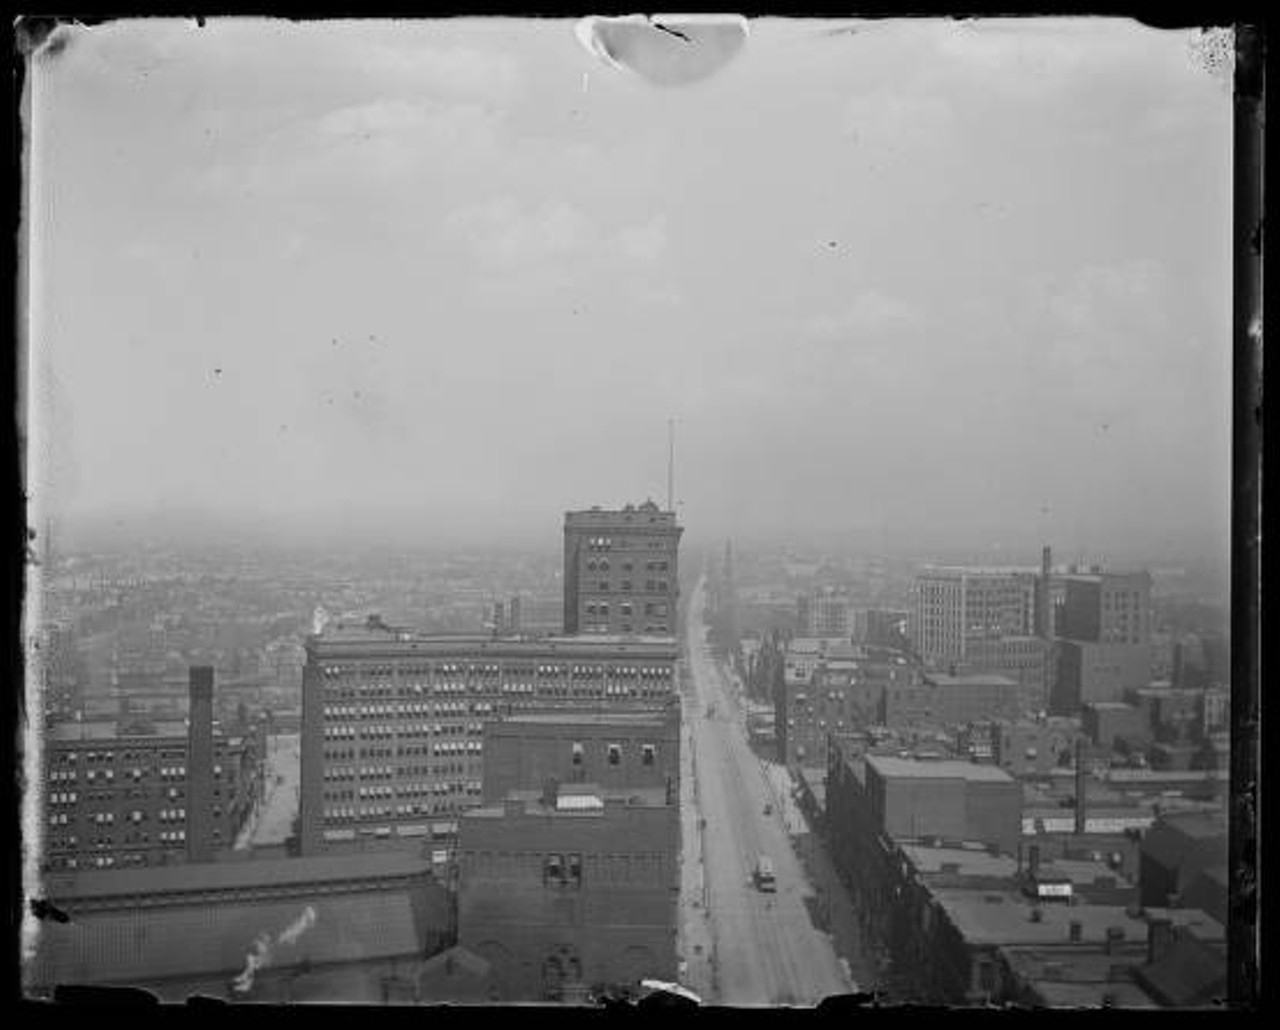 Euclid Avenue from Top of Williamson Building, 1901